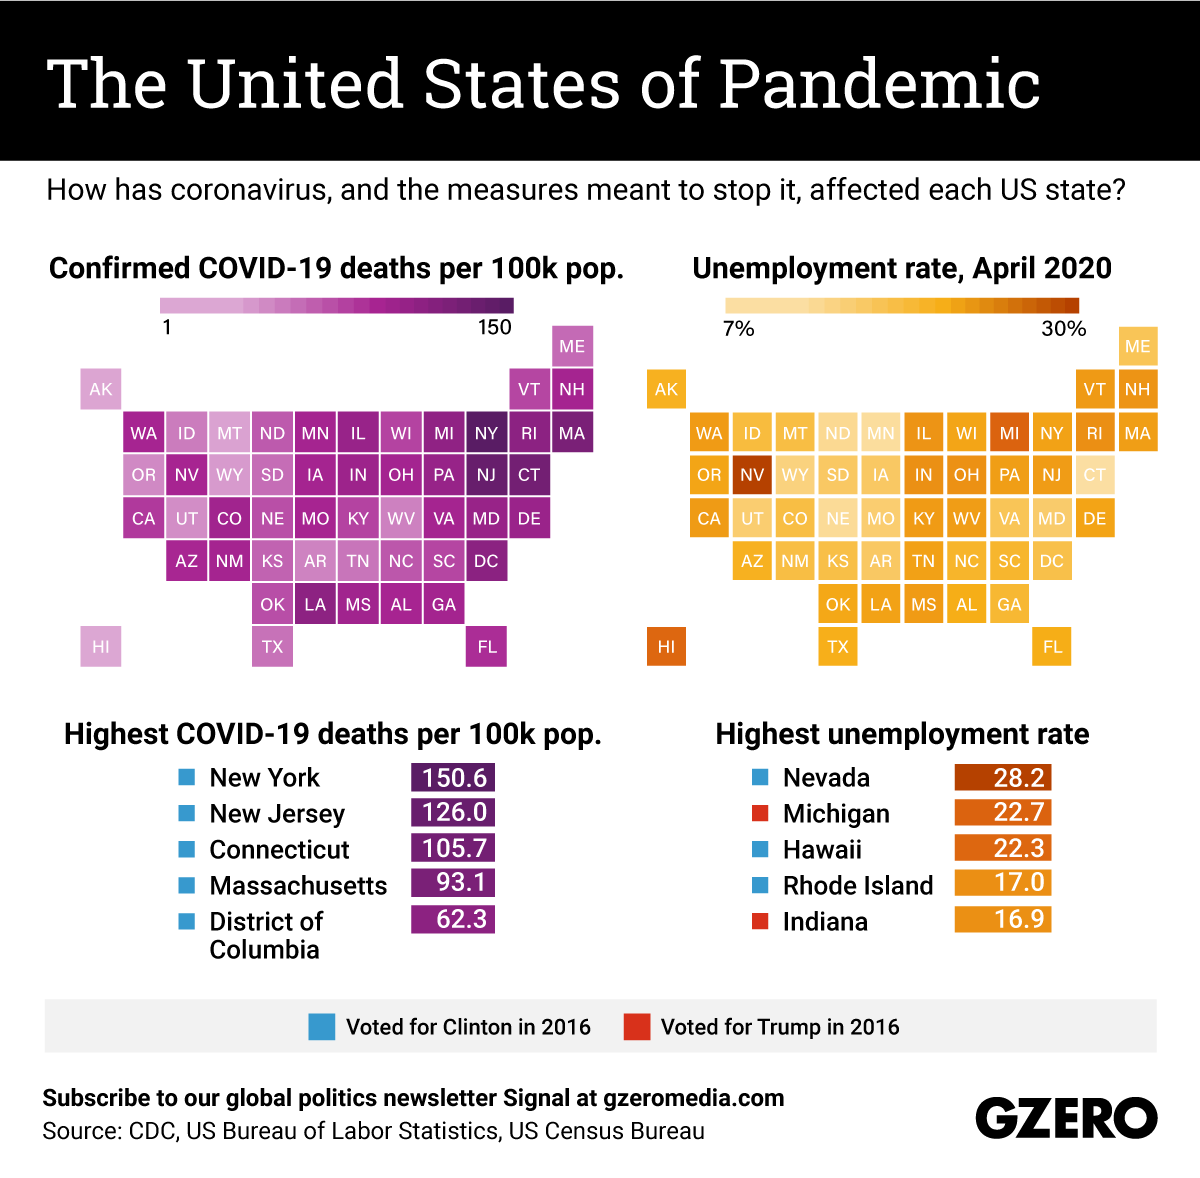 The Graphic Truth: The United States of Pandemic